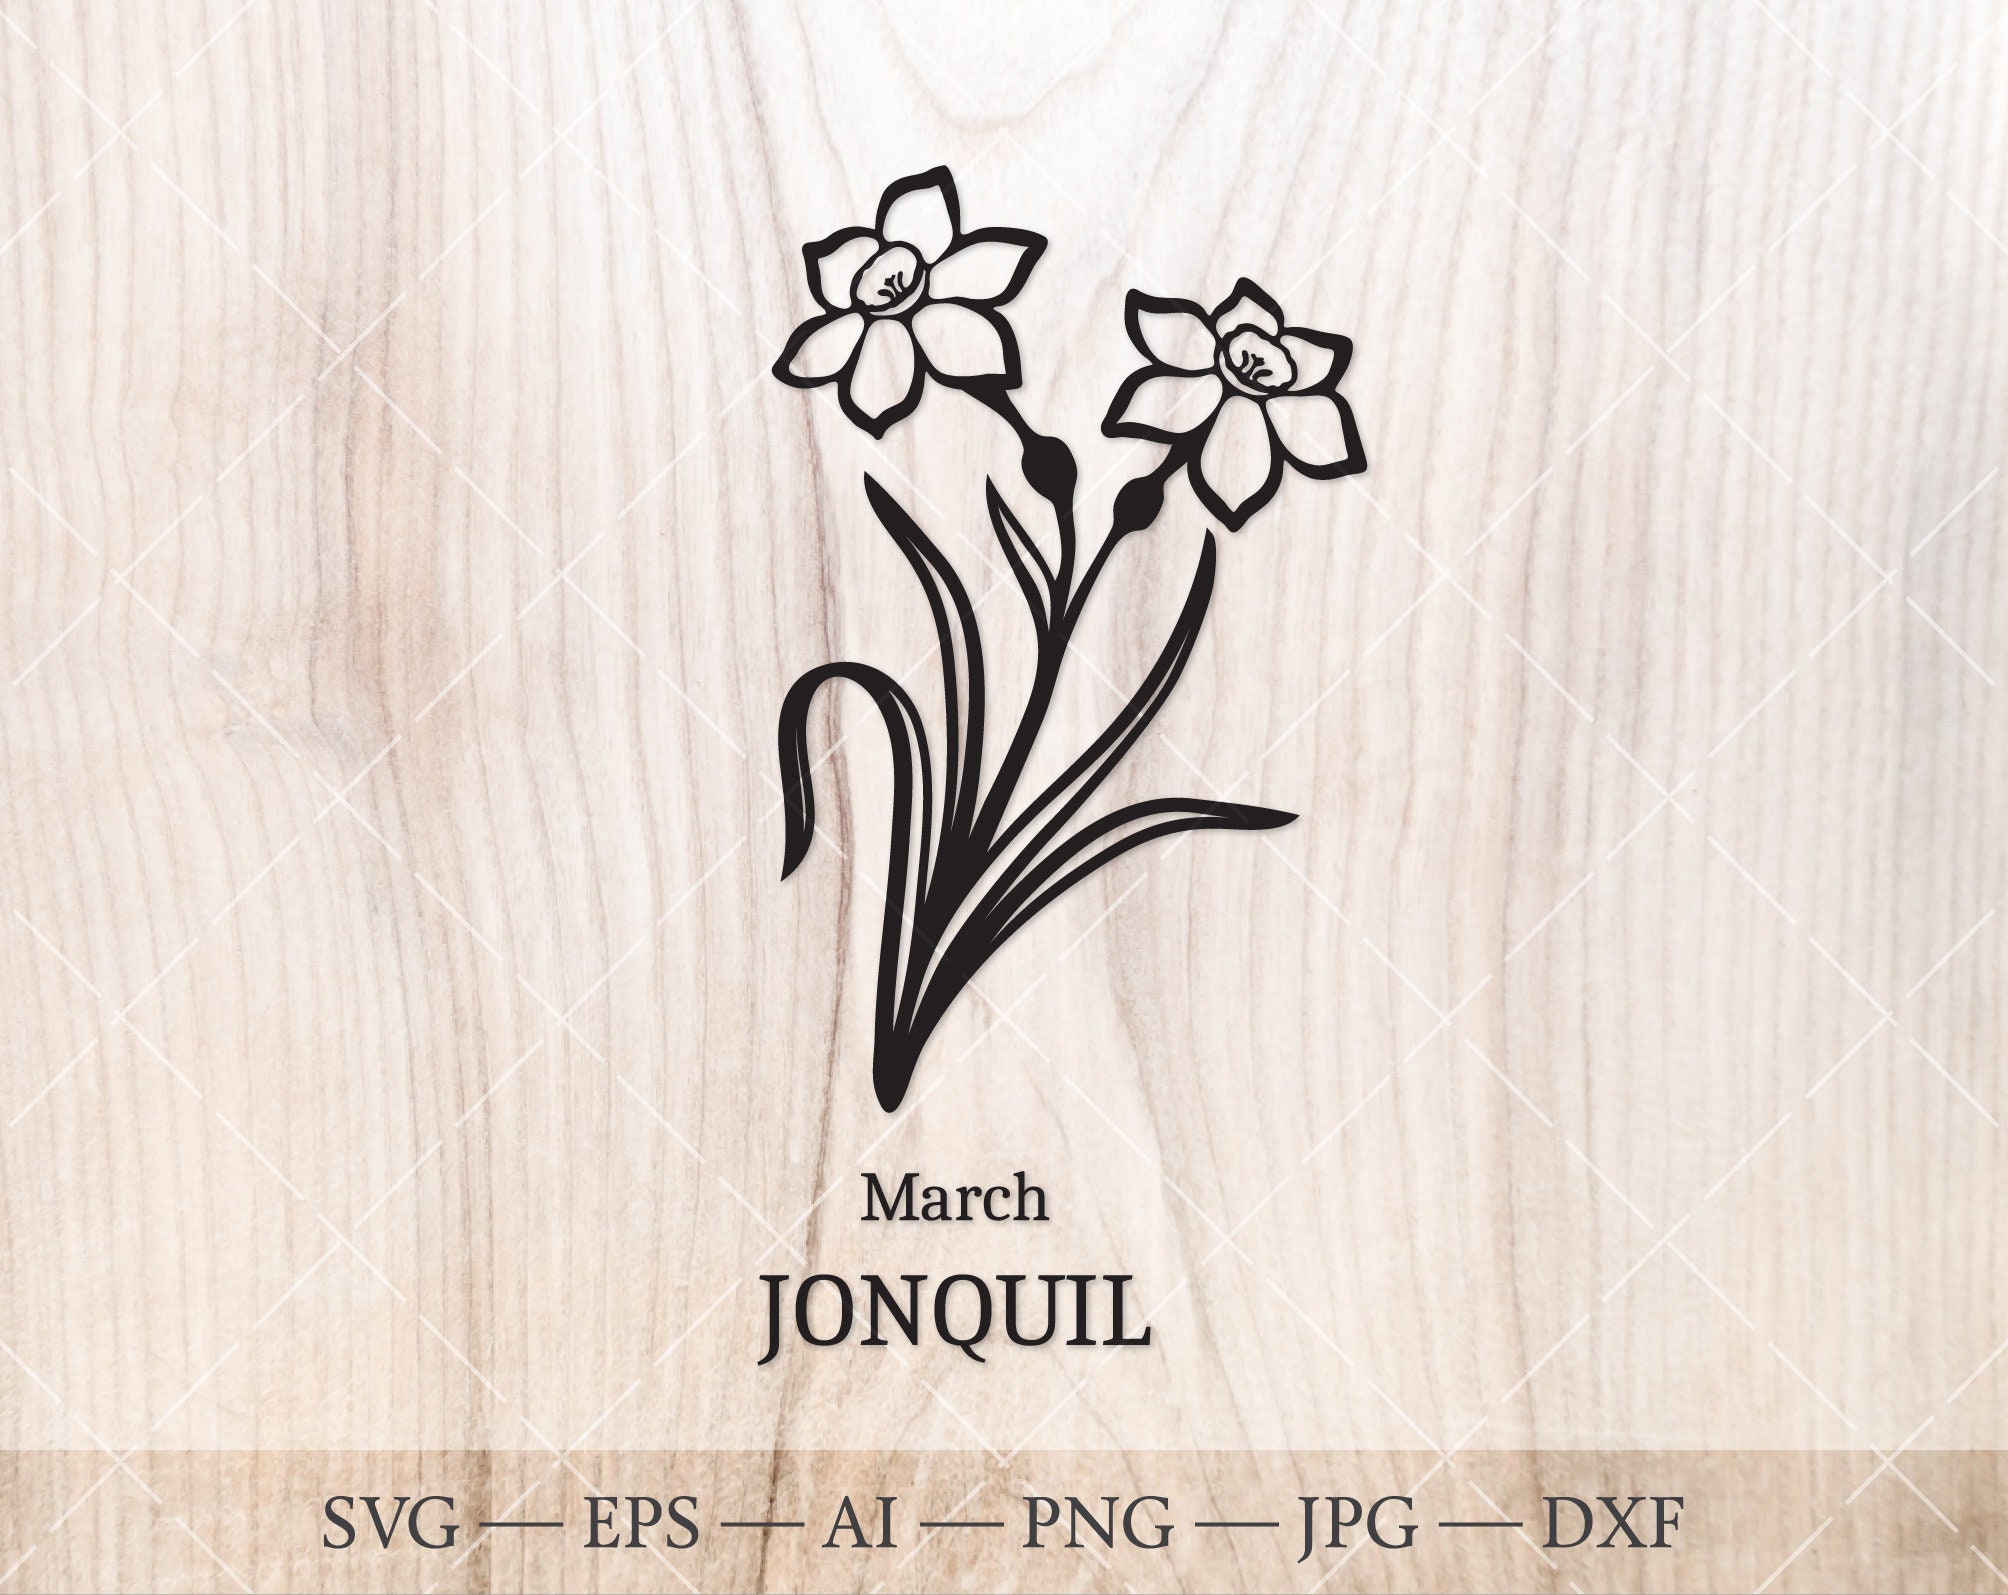 Big collection of hand drawn daffodils or jonquil Vector Image